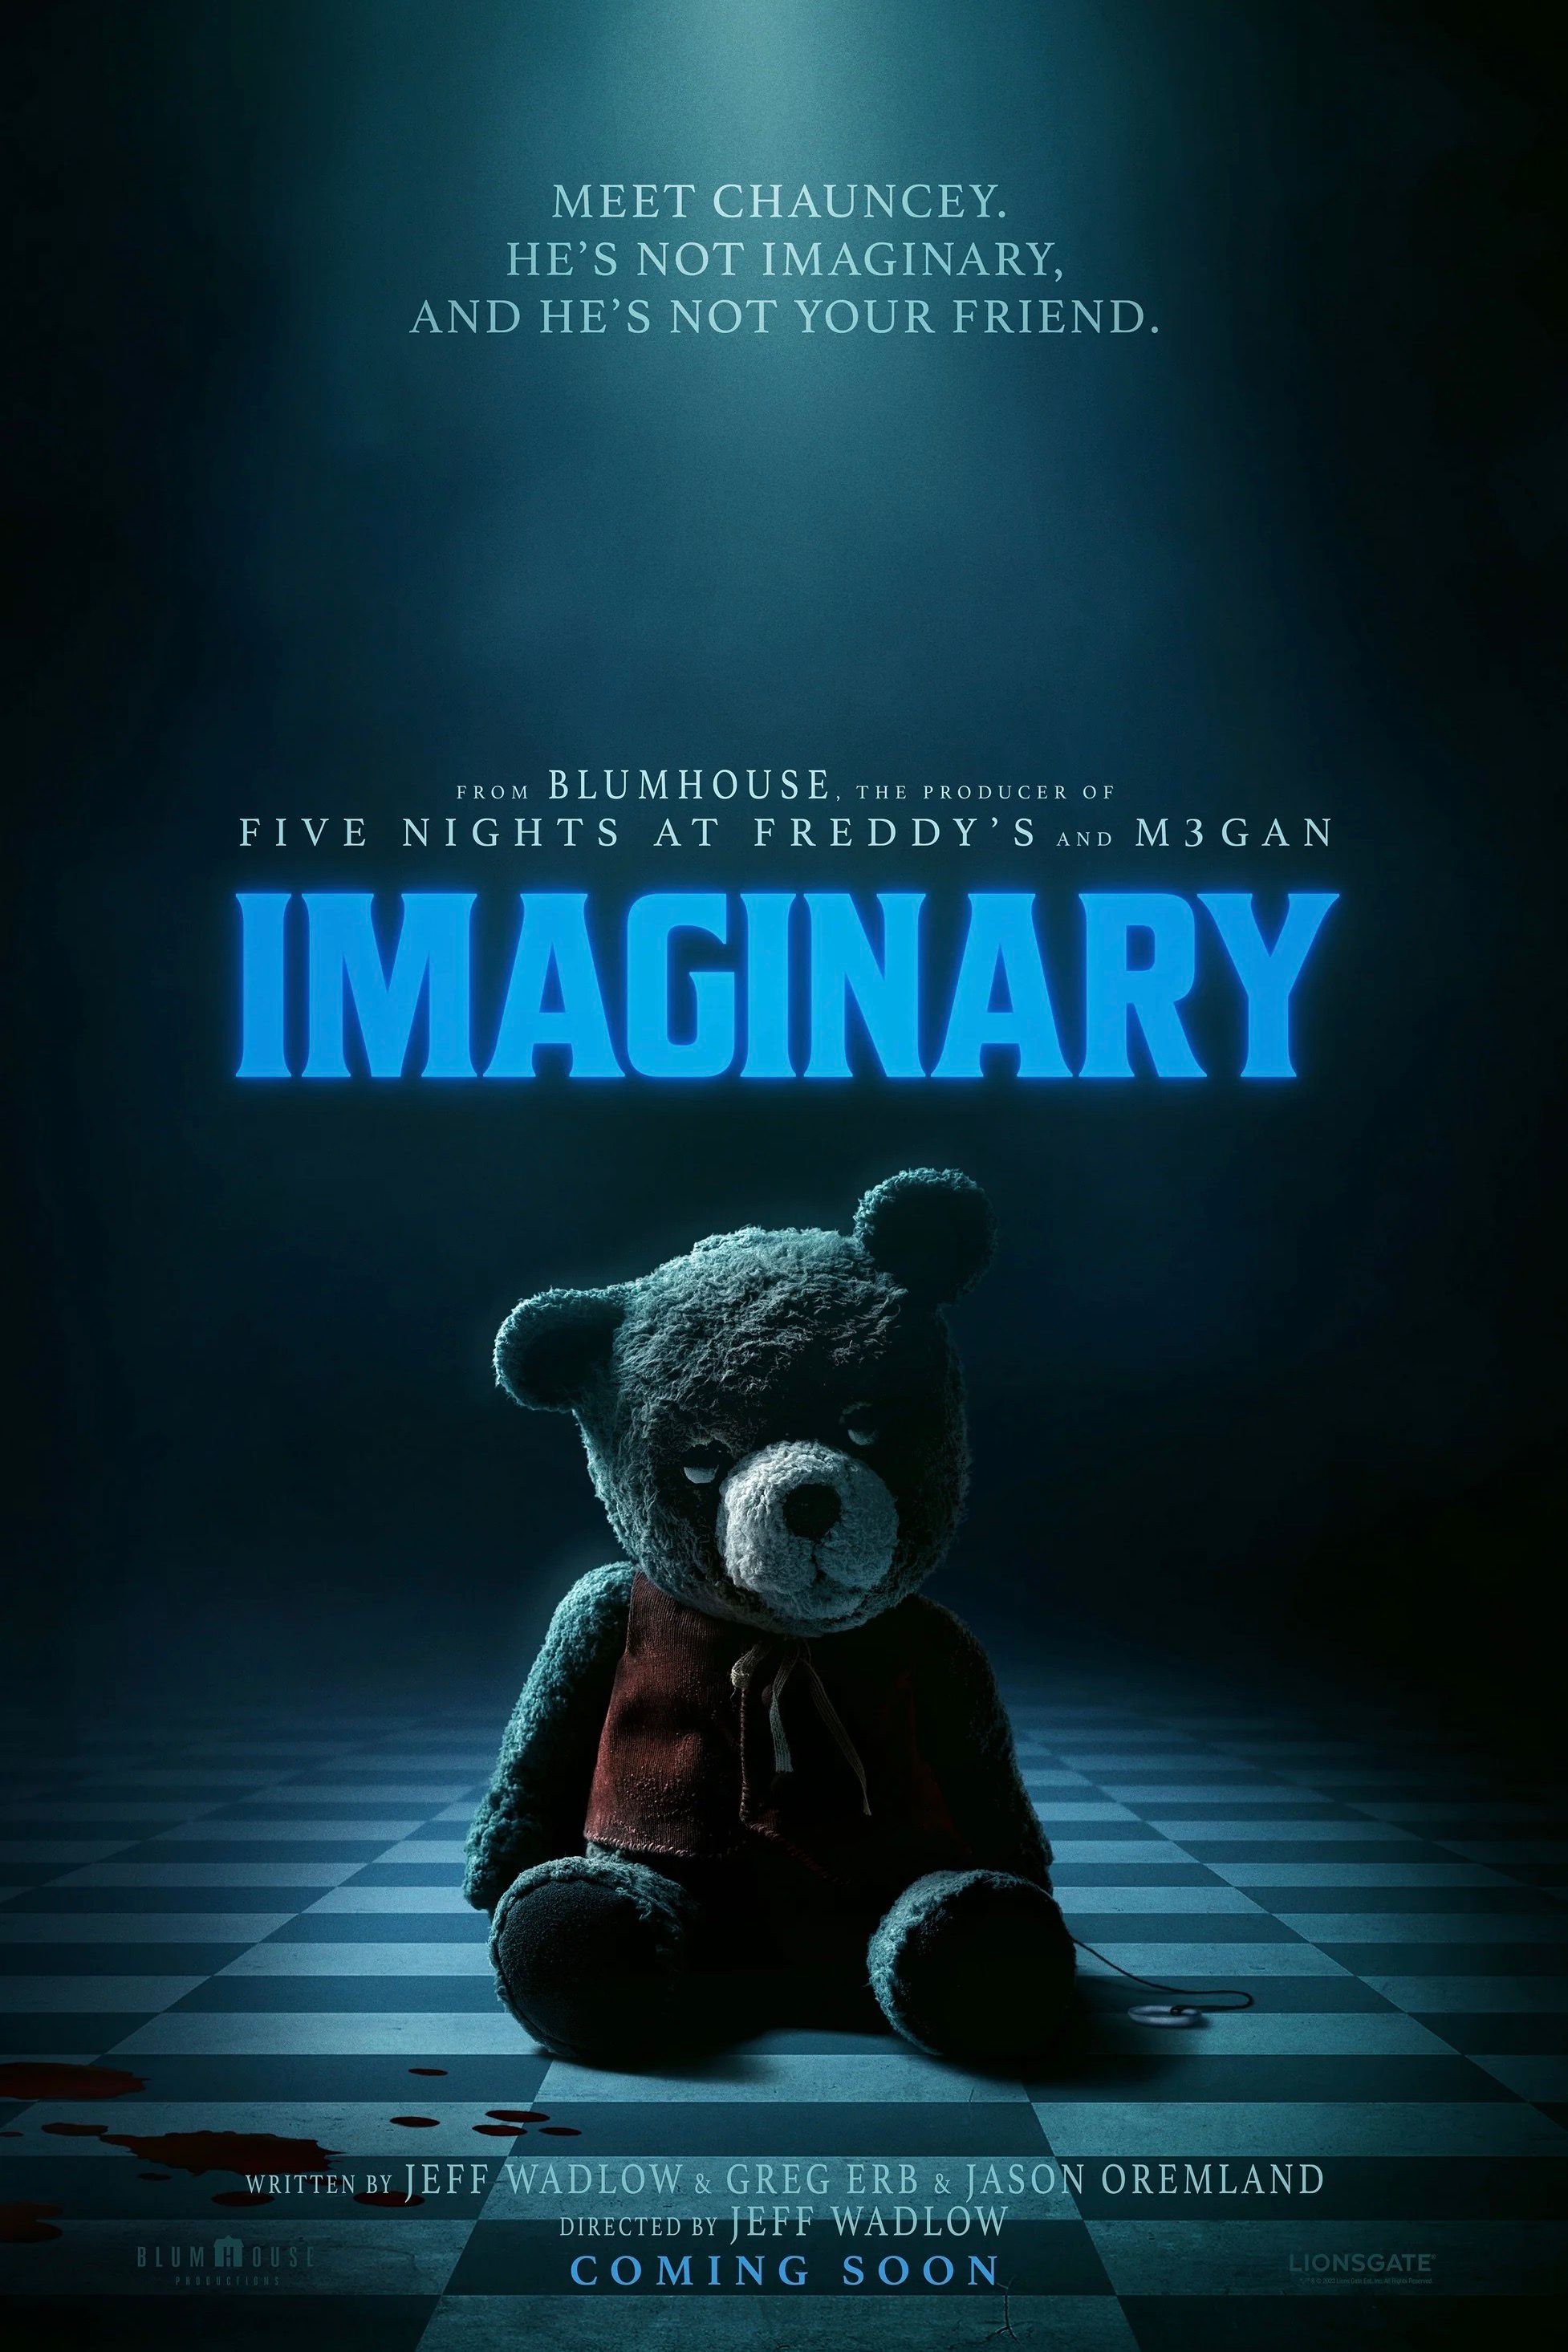 Imaginary Friends Are Demons From Other Dimensions In Blumhouse’s Imaginary Trailer